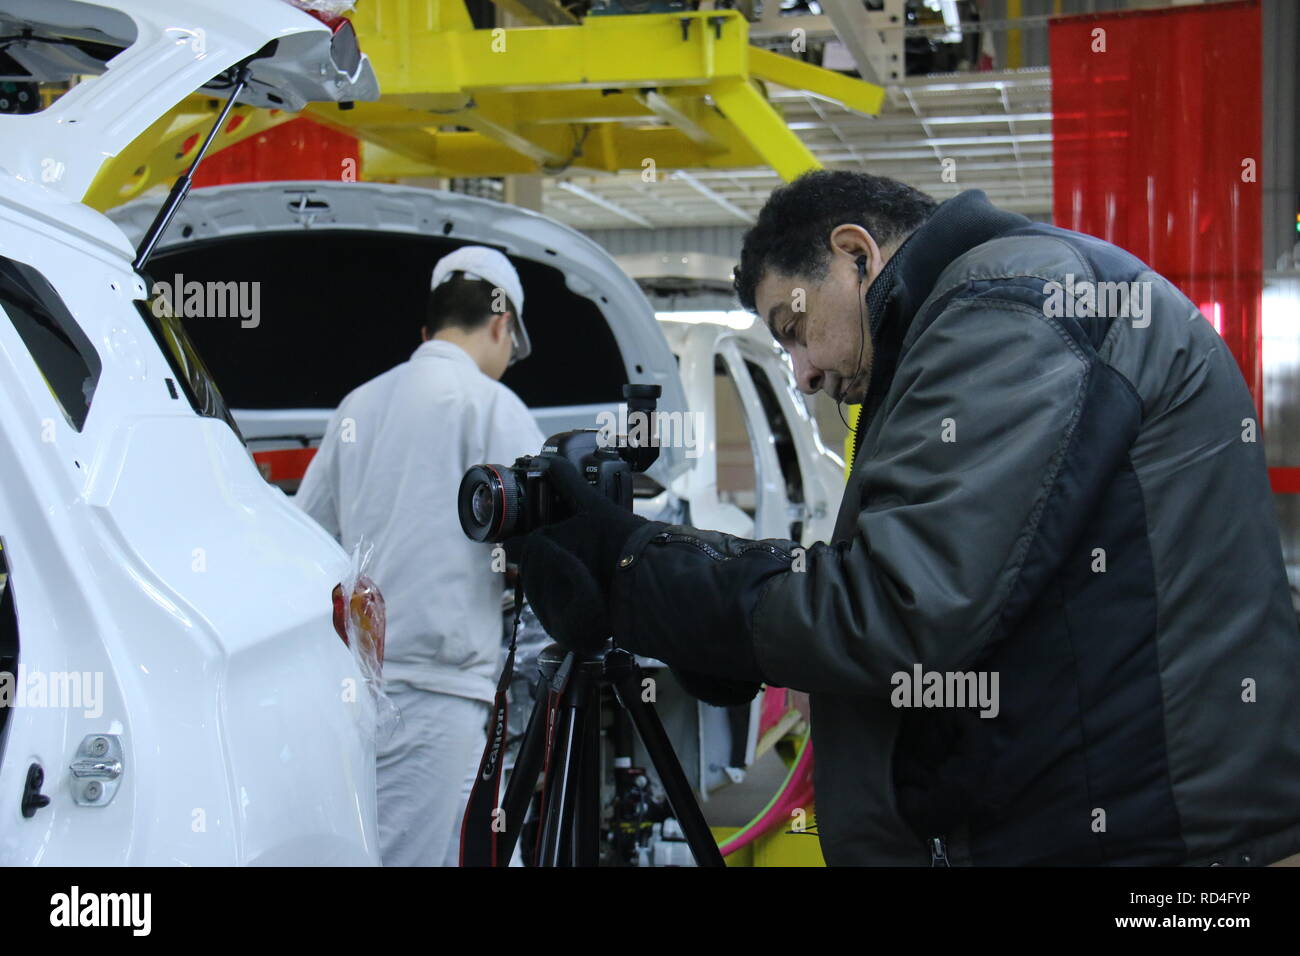 (190117) -- URUMQI, Jan. 17, 2019 (Xinhua) -- Sherif Sonbol Tadros Sonbol, vice editor-in-chief of Egypt's 'Al-Ahram Weekly', shoots at the factory of the Guangzhou Automobile Group Co., ltd. (GAC Group) in Urumqi, capital of northwest China's Xinjiang Uygur Autonomous Region, Jan. 10, 2019. A media group consisting of people from six countries praised the development and stability of Xinjiang after visiting the region. The Silk Road Celebrity China Tour was held from Jan. 9 to 16 in Xinjiang, with 12 media representatives from Egypt, Turkey, Pakistan, Afghanistan, Bangladesh and Sri L Stock Photo